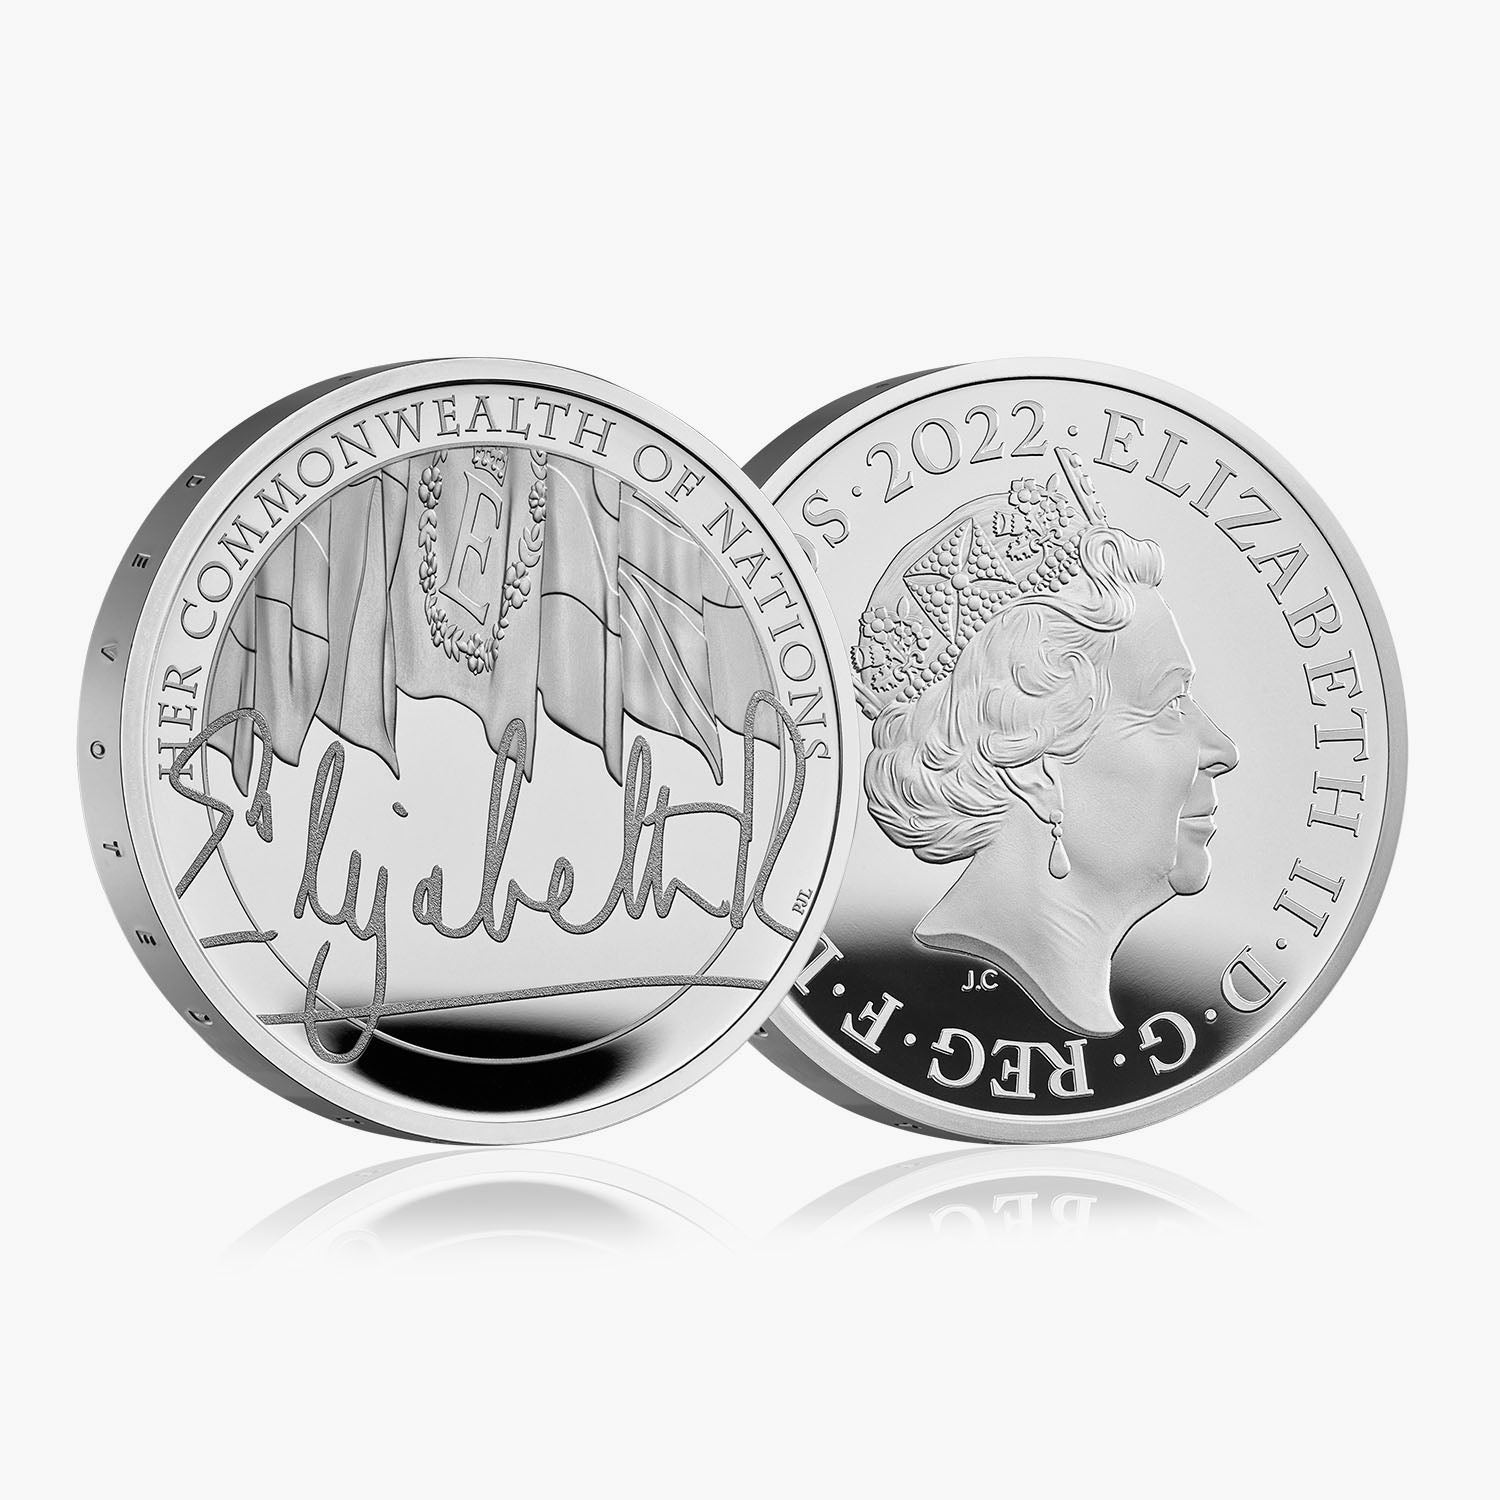 The Queen’s Reign Commonwealth 2022 UK £5 Silver Proof Coin